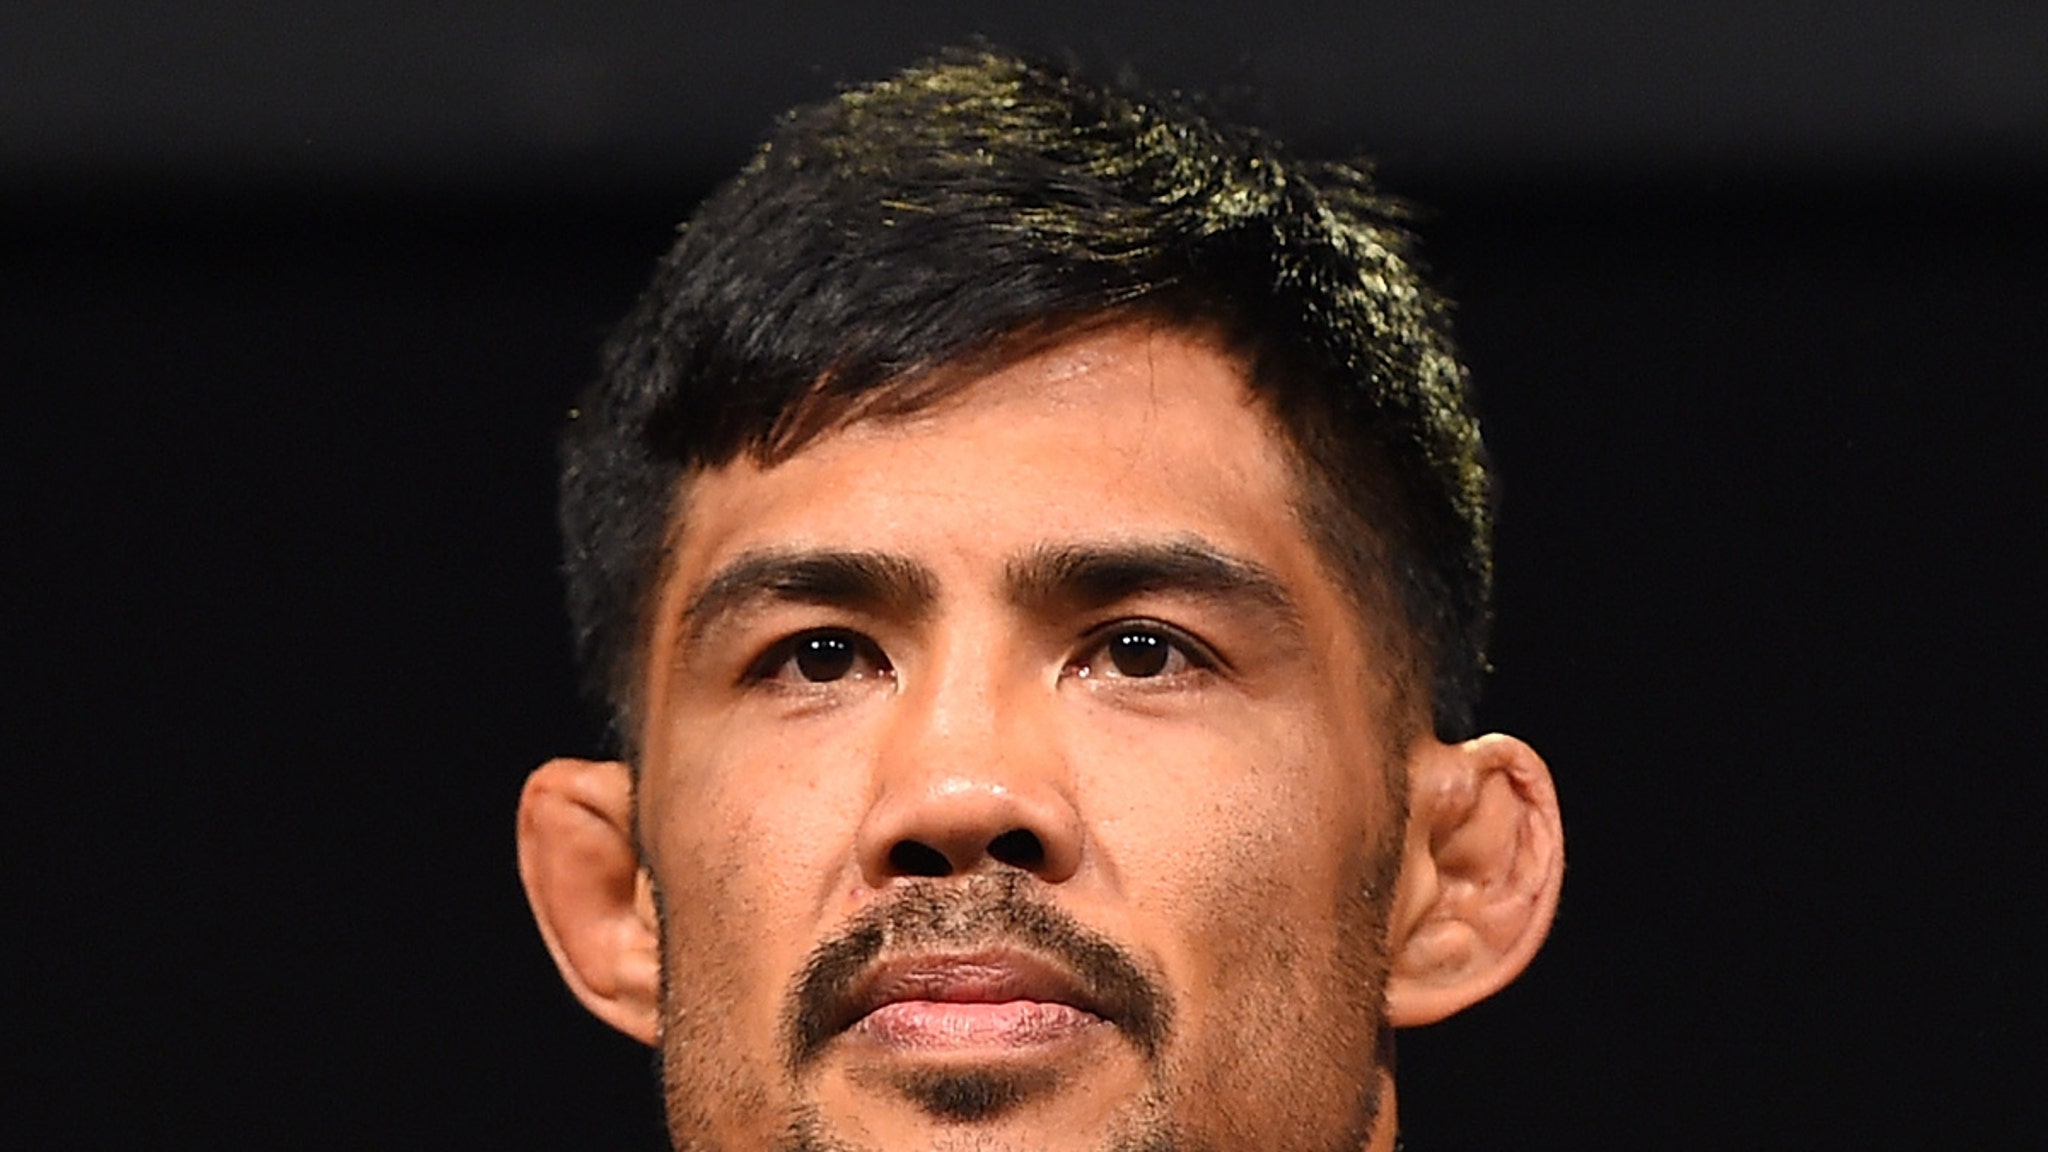 UFC's Mark Munoz Placed On Admin Leave From H.S. Job After Letting Kids Box Each Other thumbnail